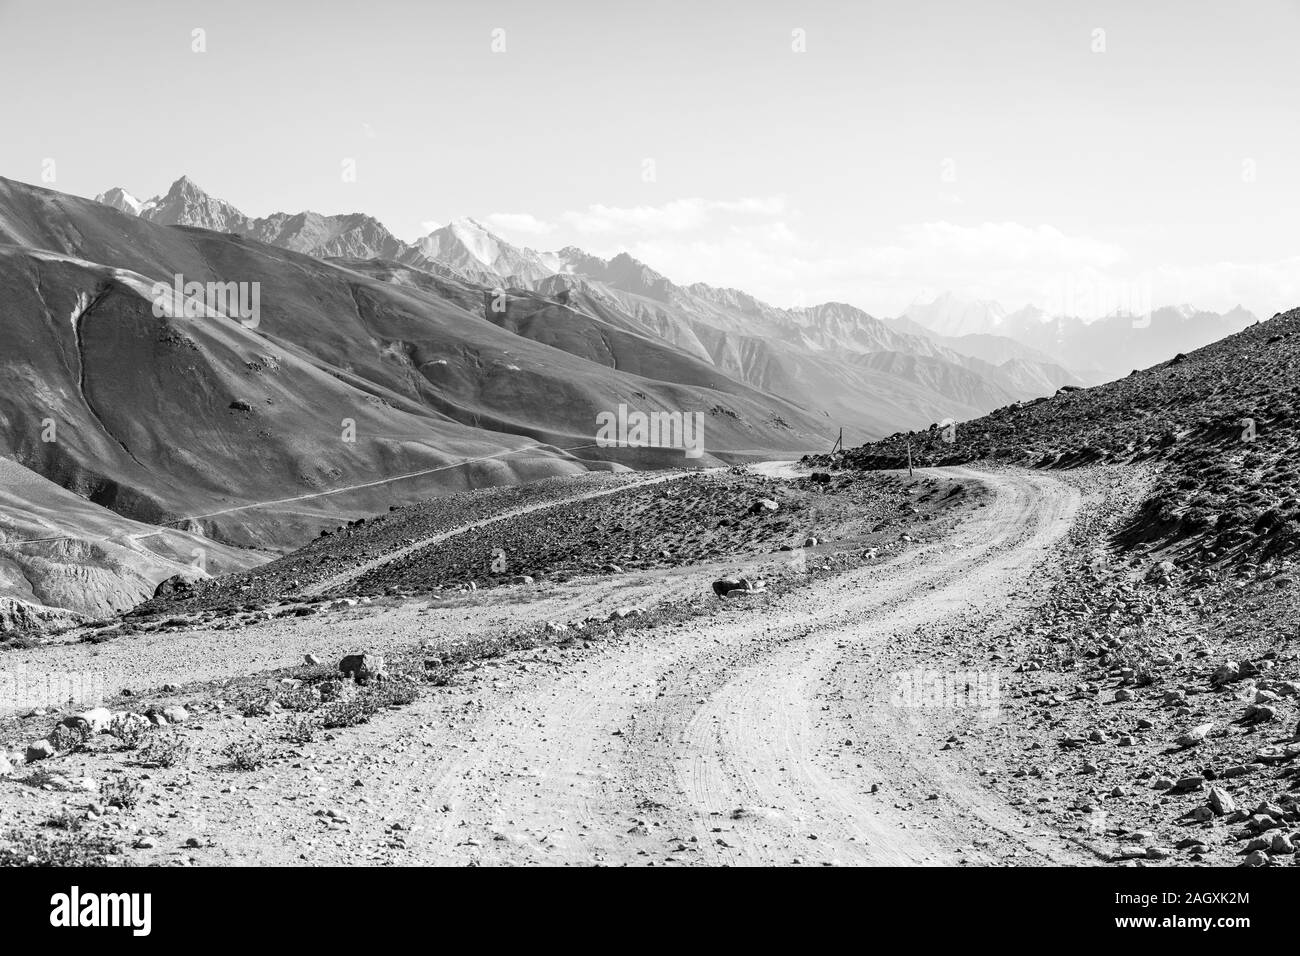 Pamir Highway in the desert landscape of the Pamir Mountains in Tajikistan. Afghanistan is on the left. The Mountains in the background are the Hindu Stock Photo